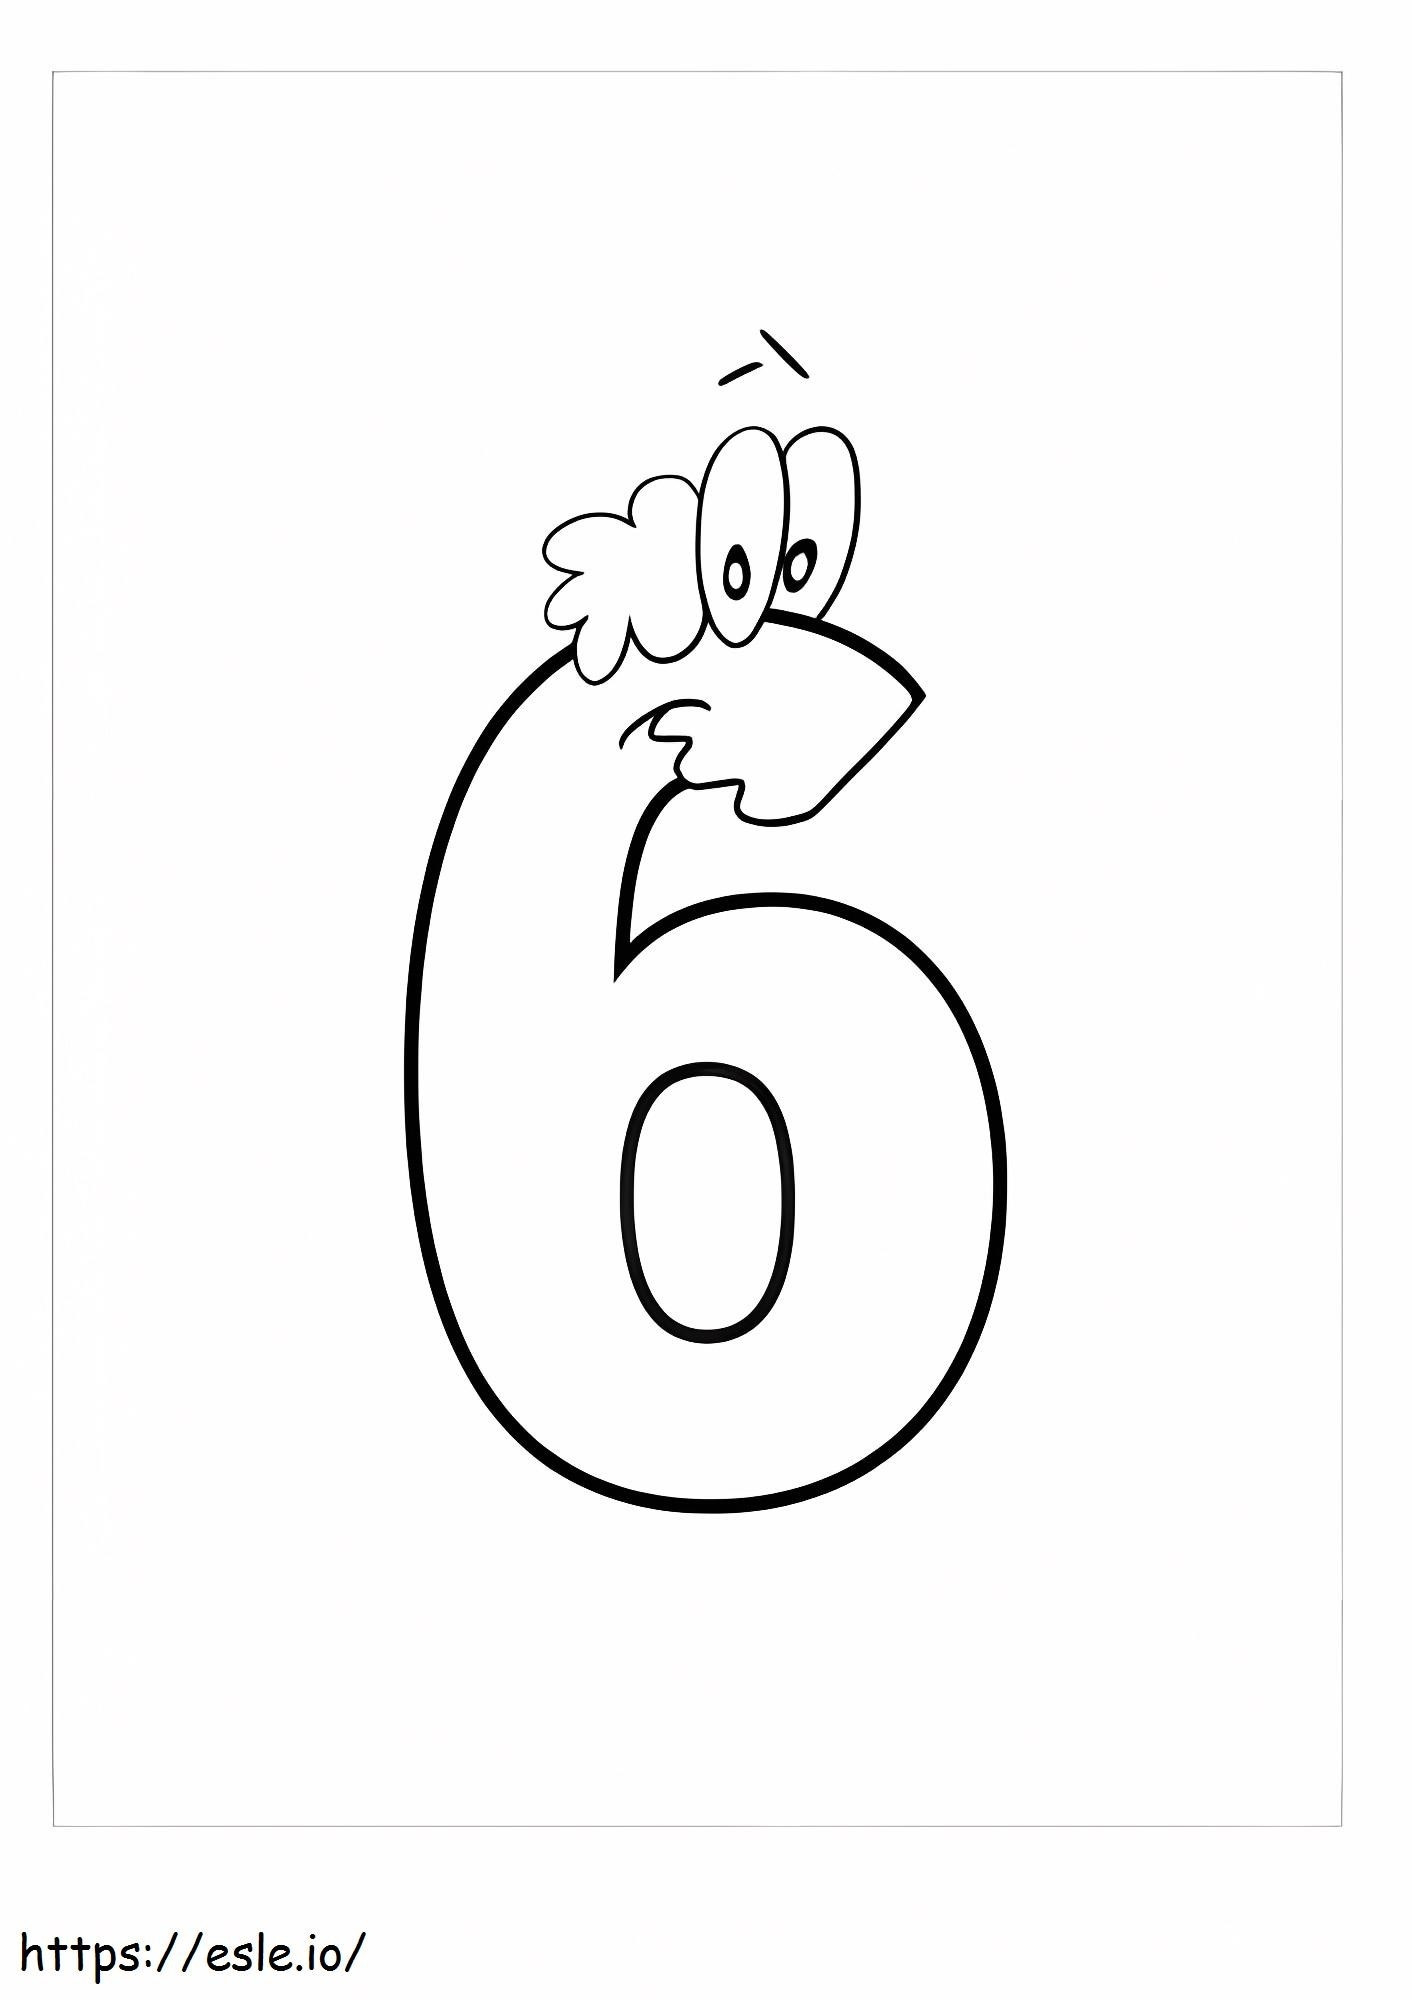 Old Number Six coloring page